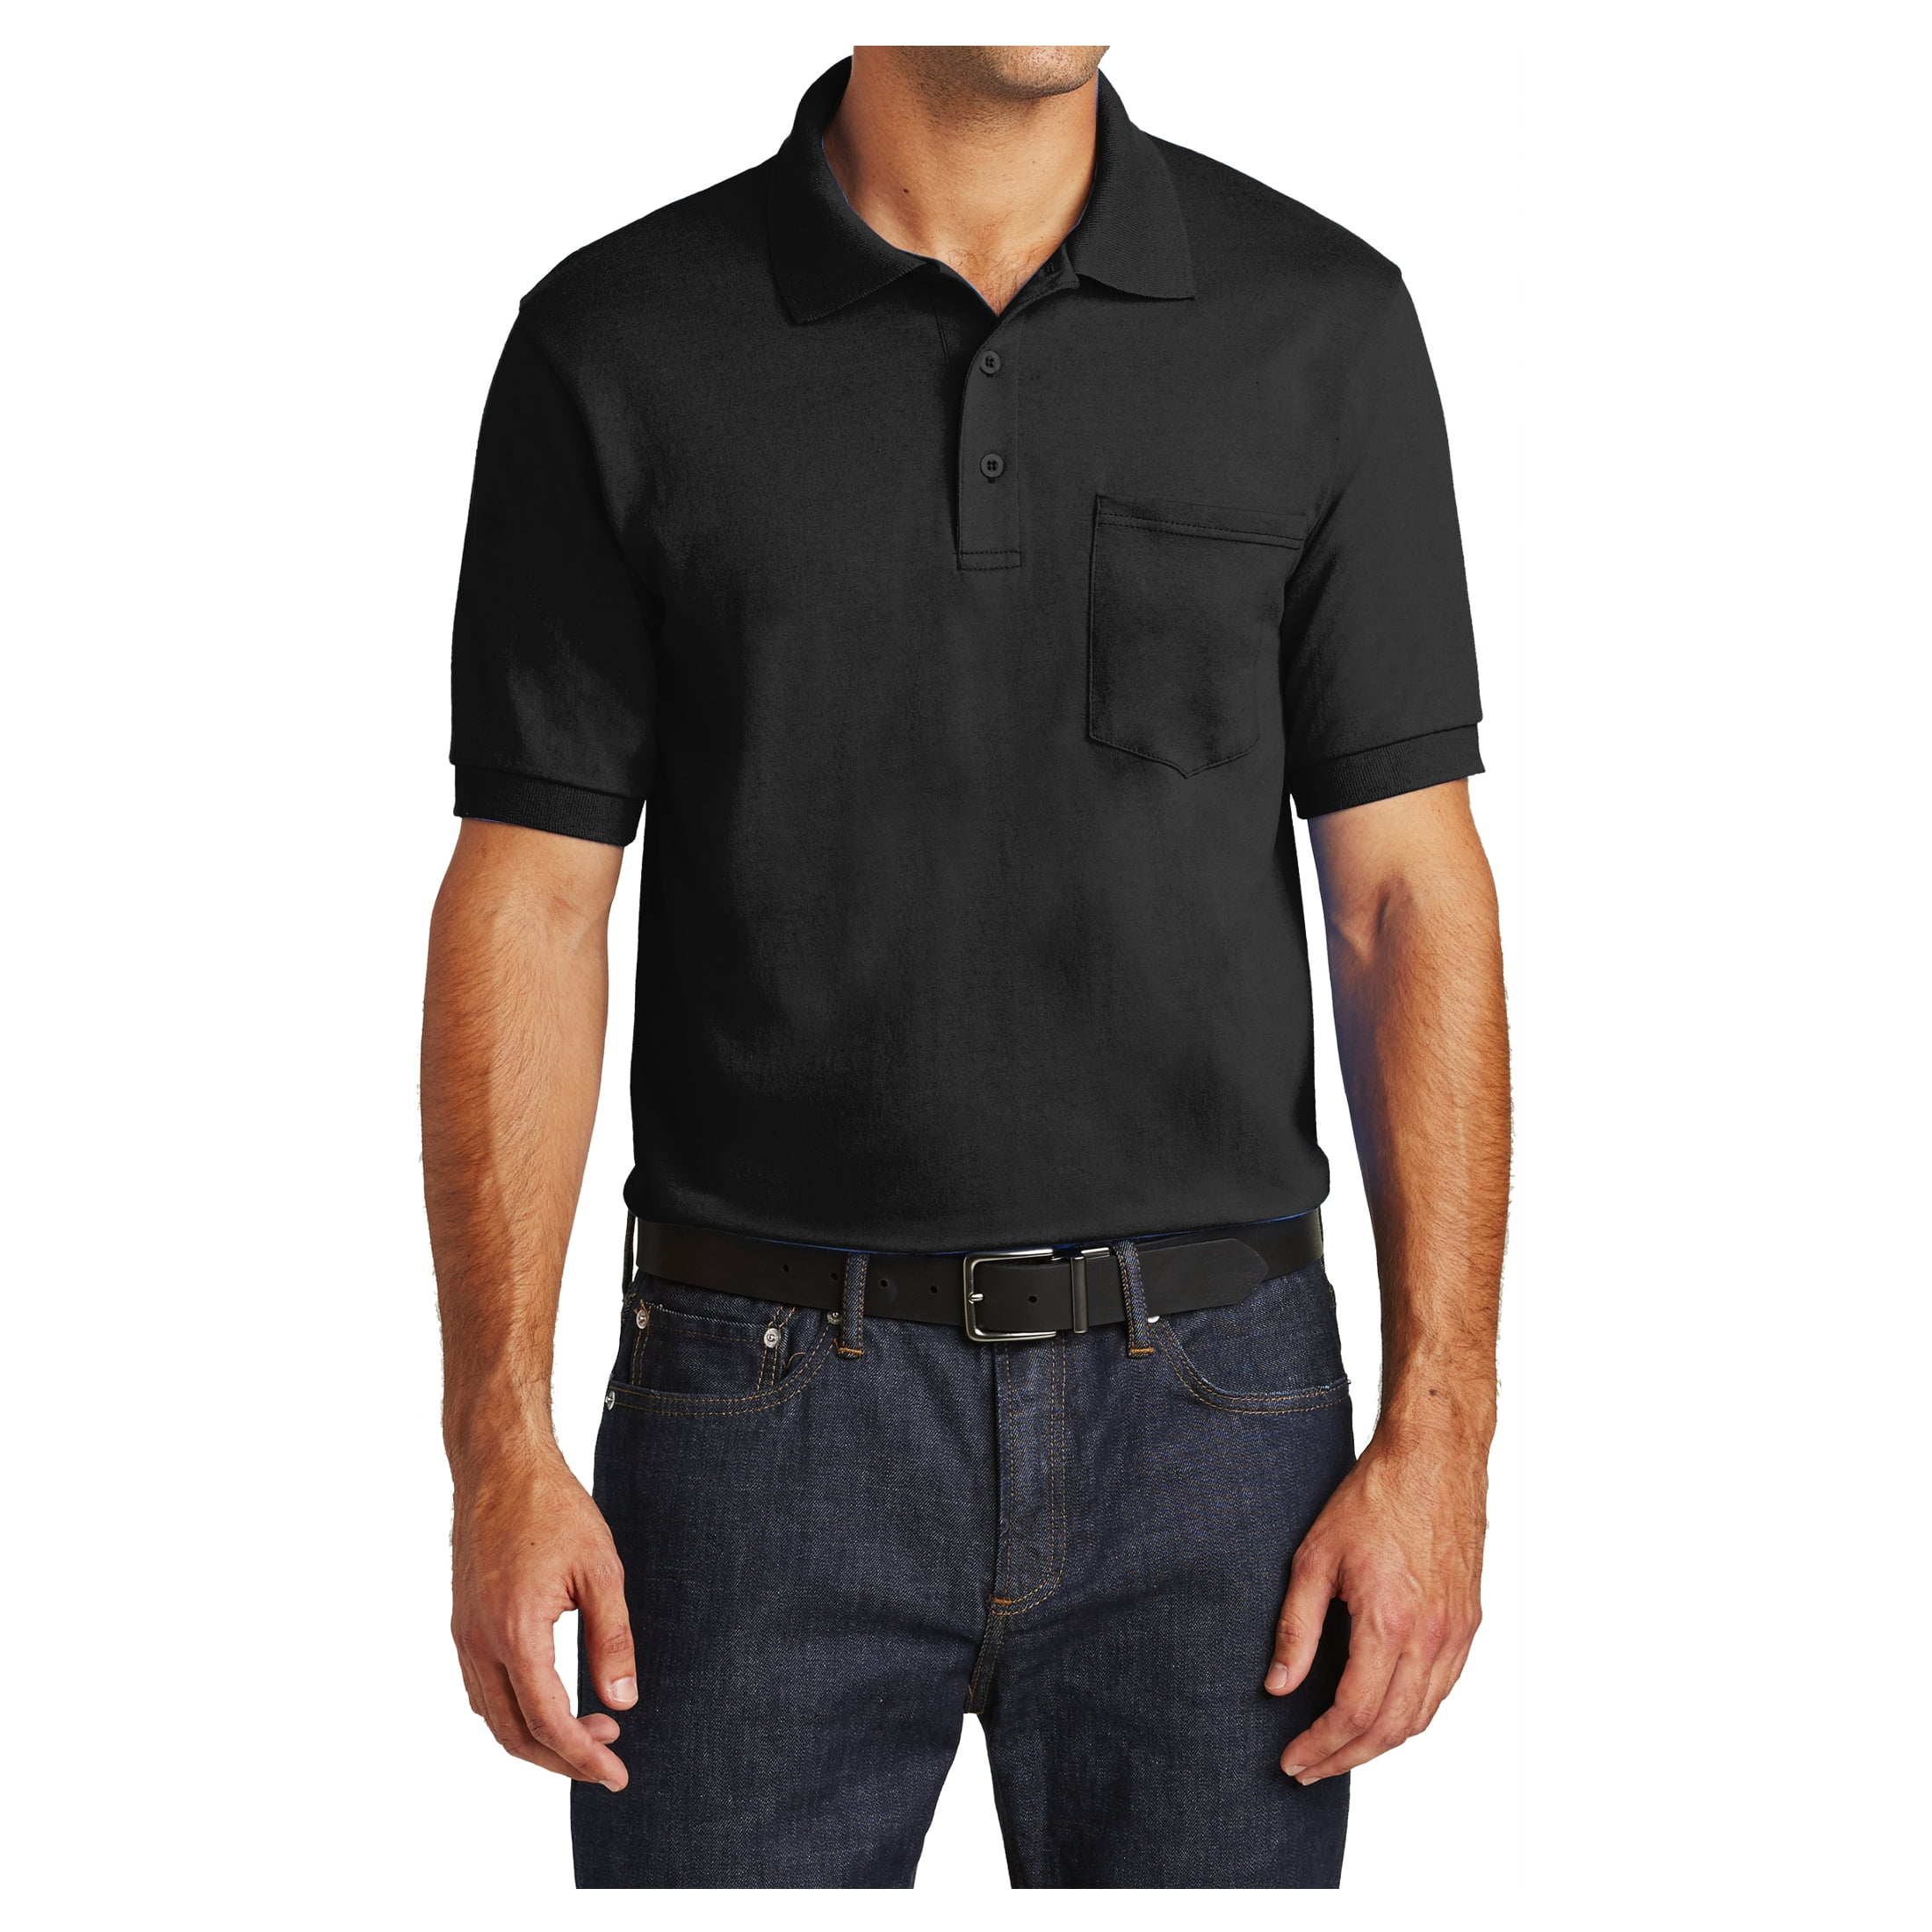 YUNY Men Solid Color Short-Sleeve Summer with Pockets Polo Shirt XL Black